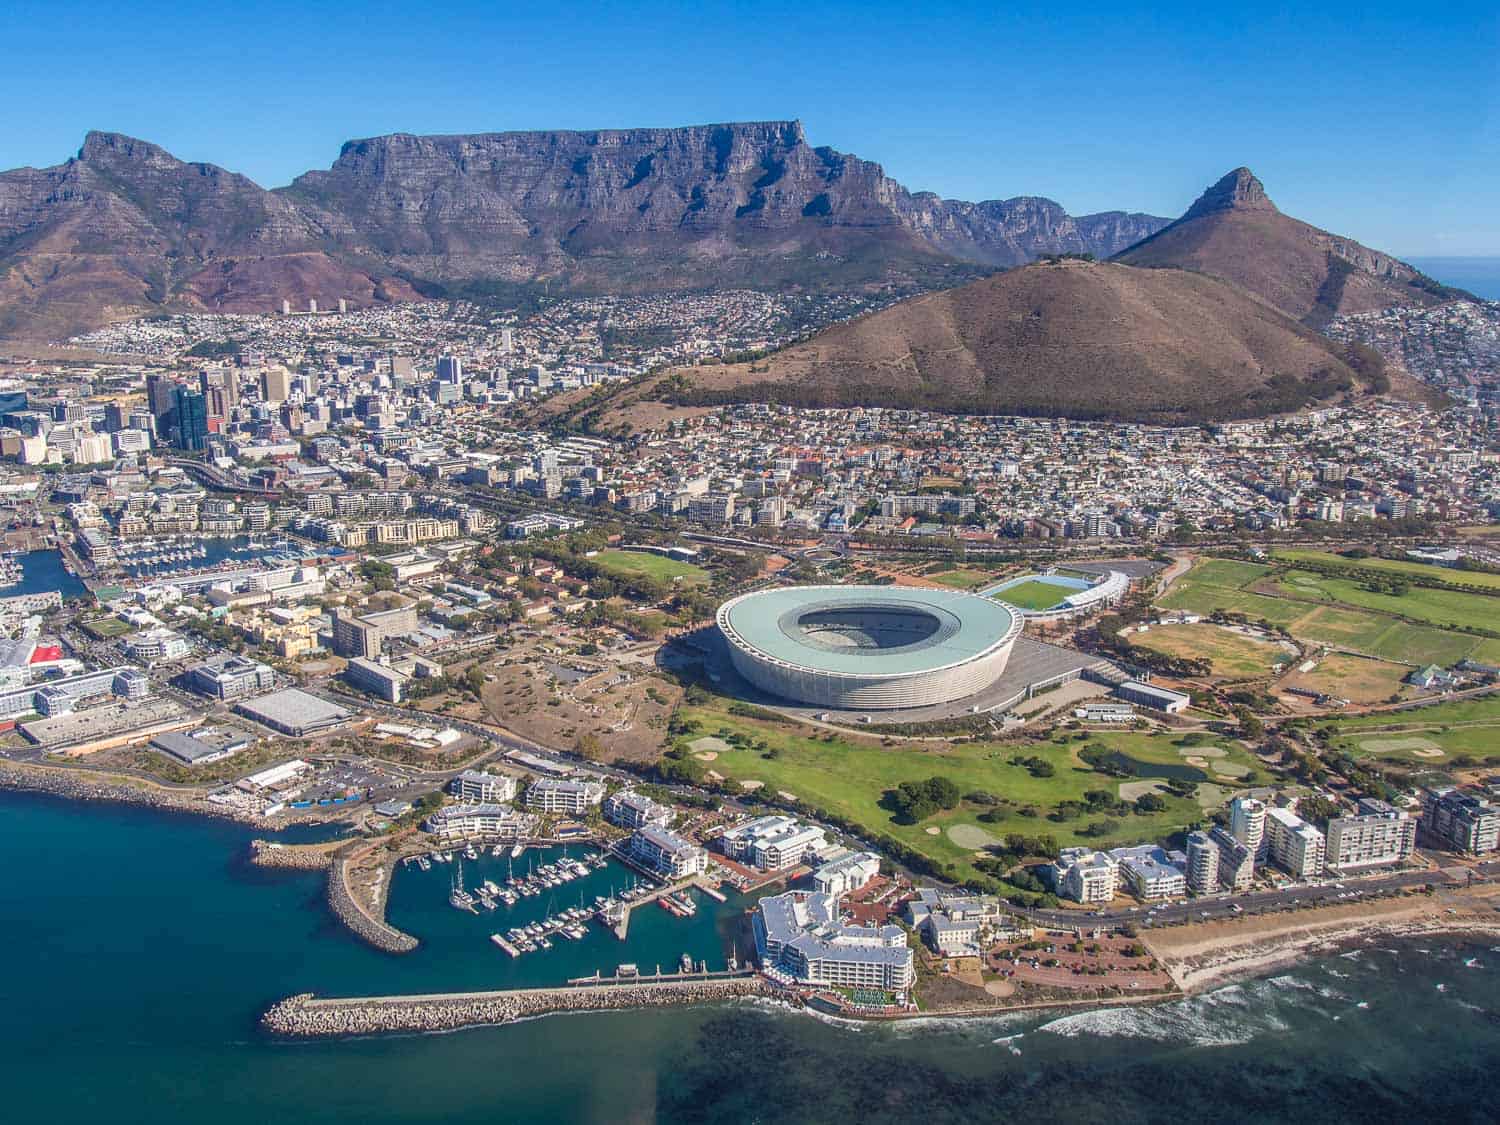 Cape Town Helicopters trip: Cape Town stadium and Green Point Park